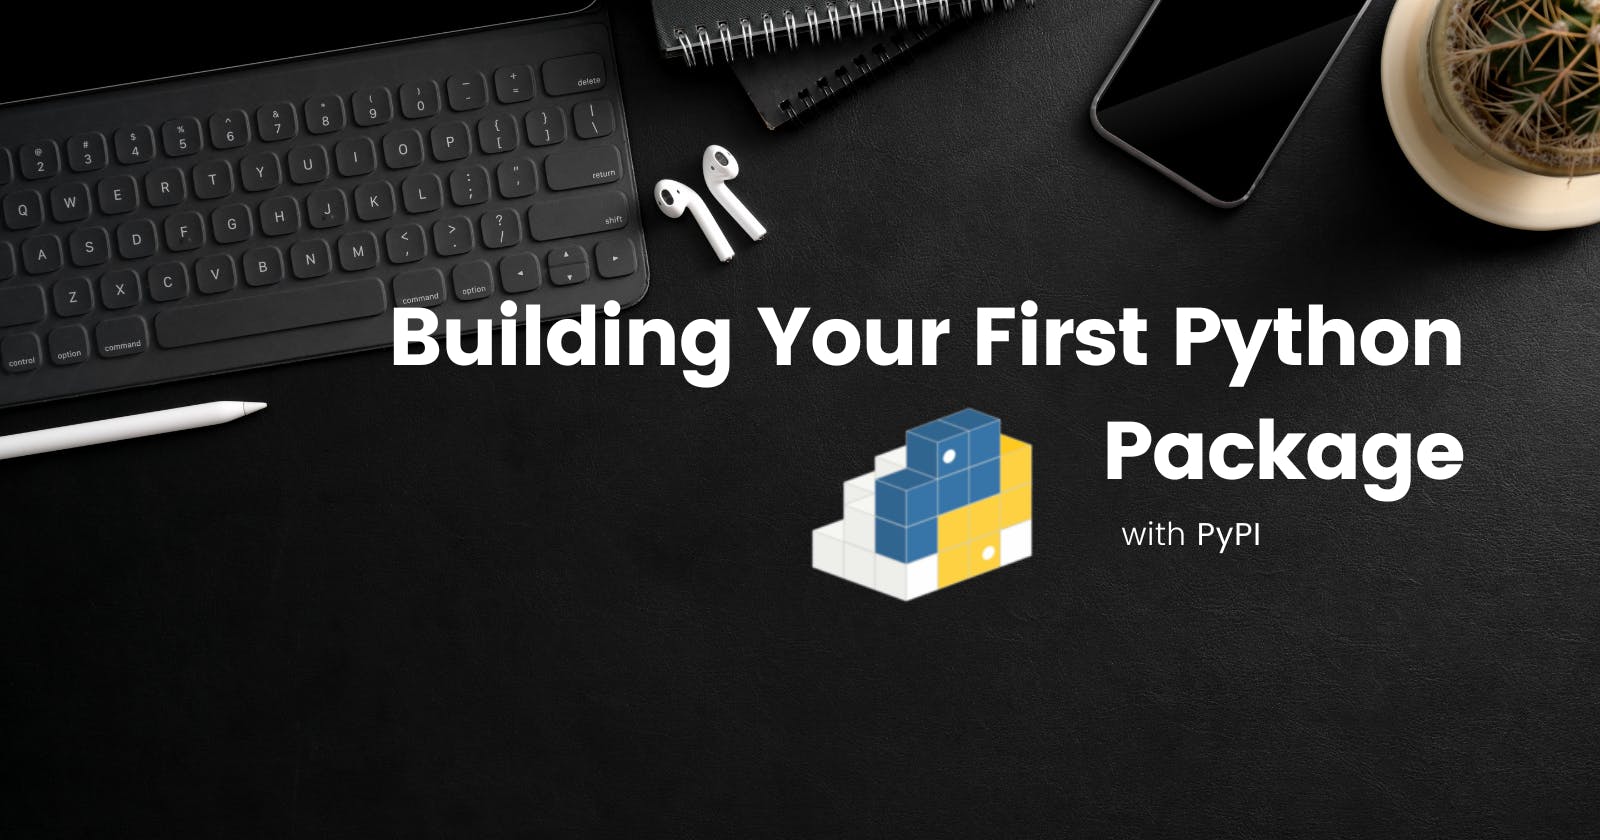 Building Your First Python Package with PyPI